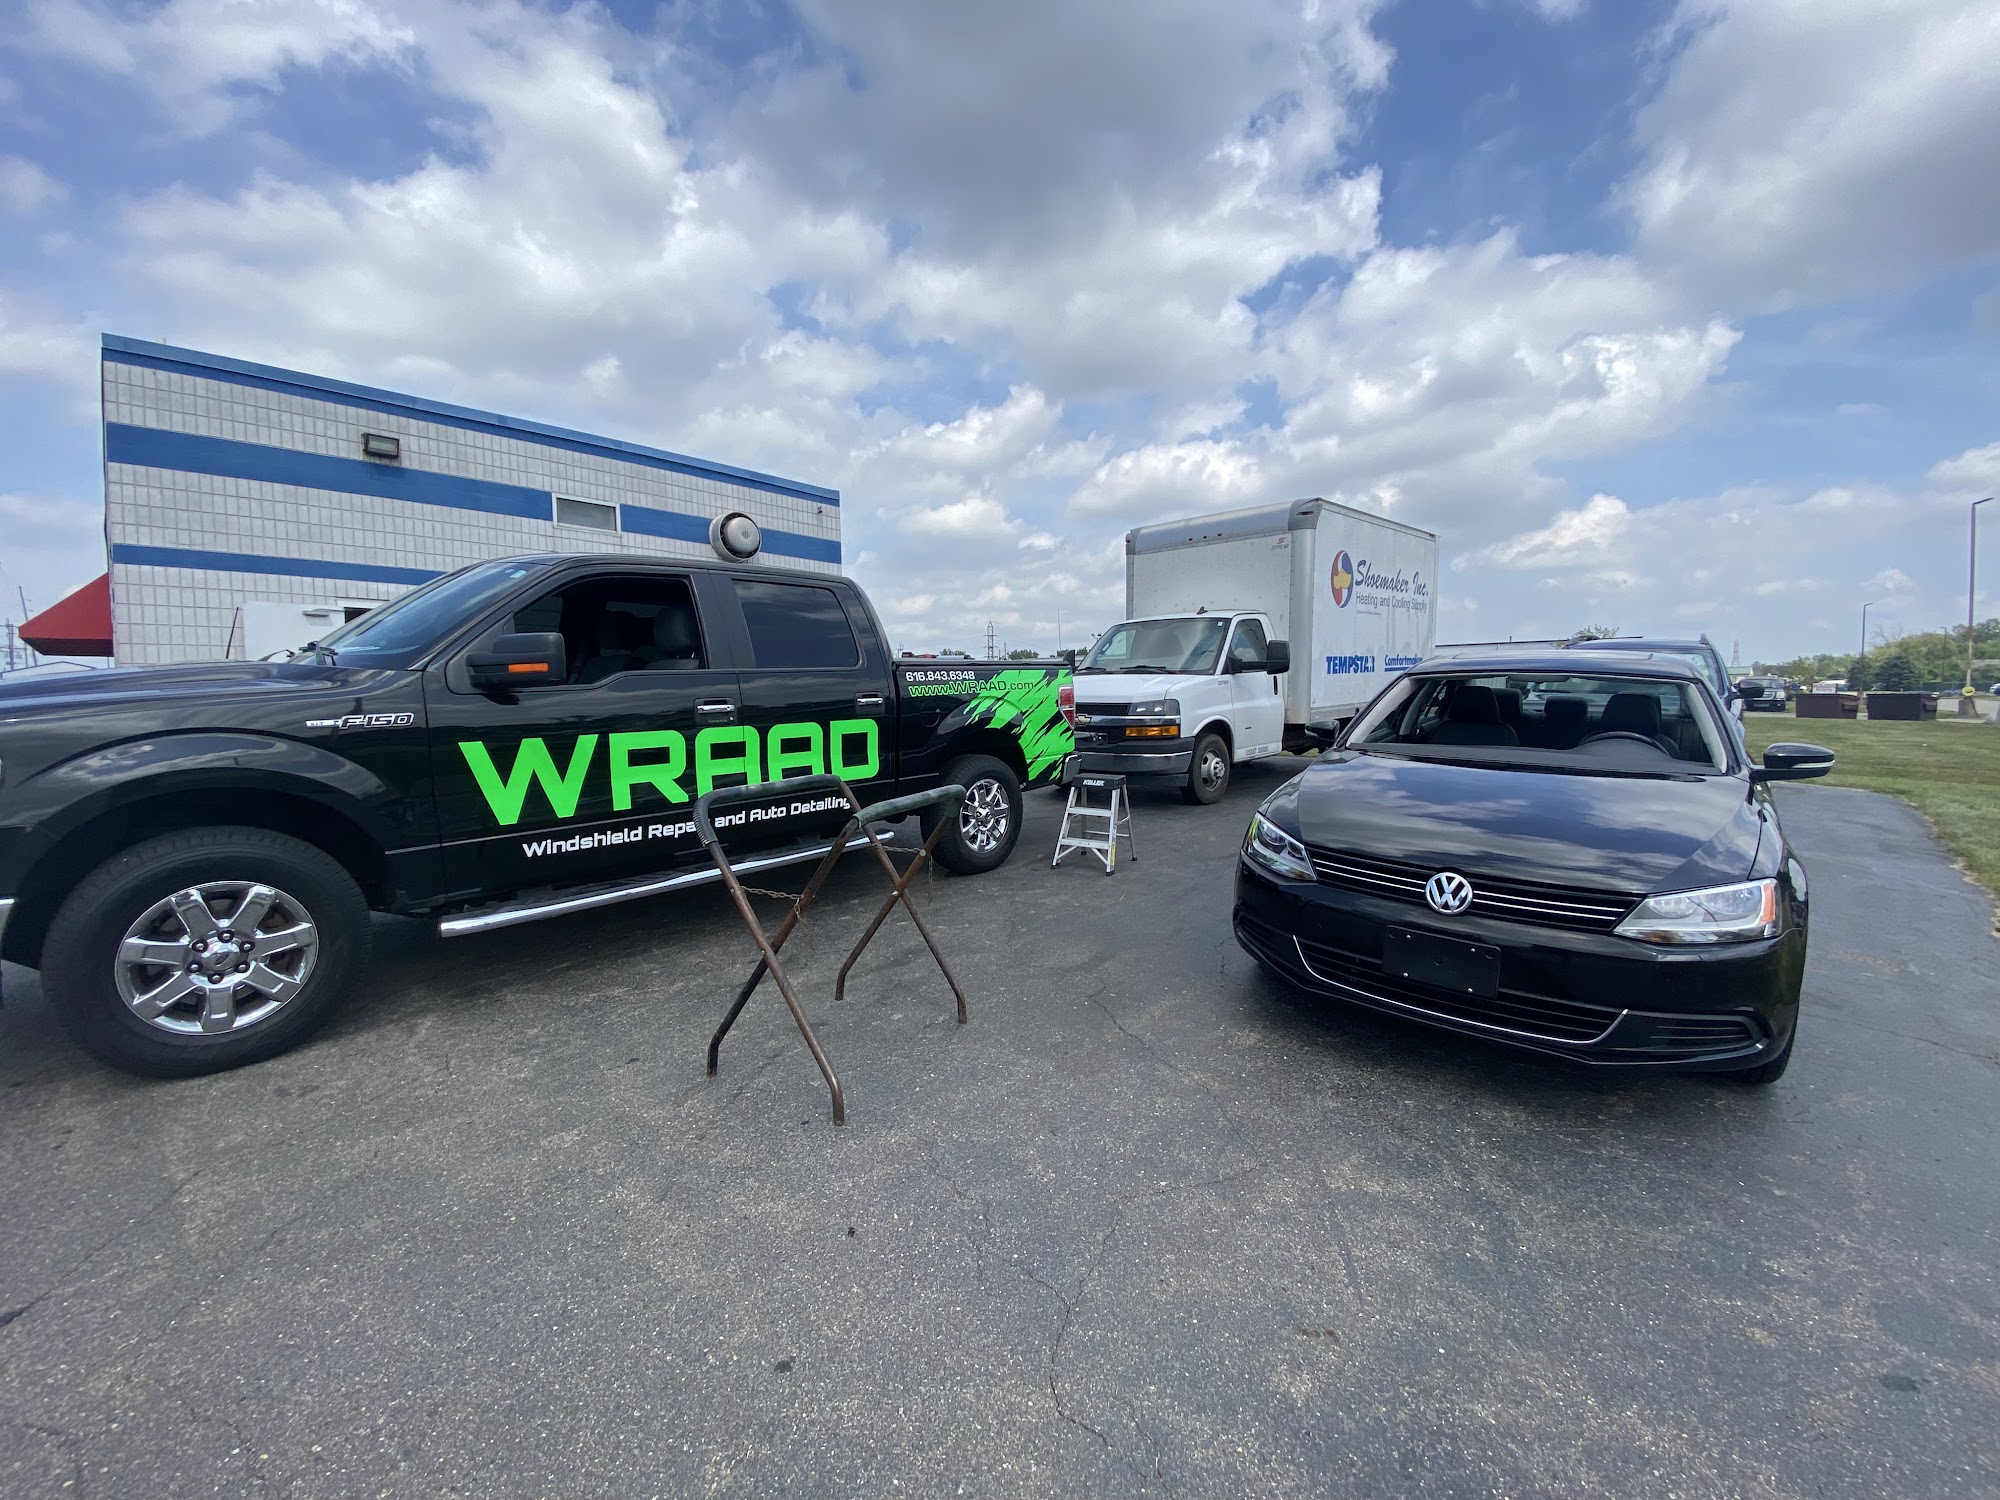 WRAAD (Windshield Repair And Auto Detailing) 10702 Chicago Dr, Zeeland Michigan 49464